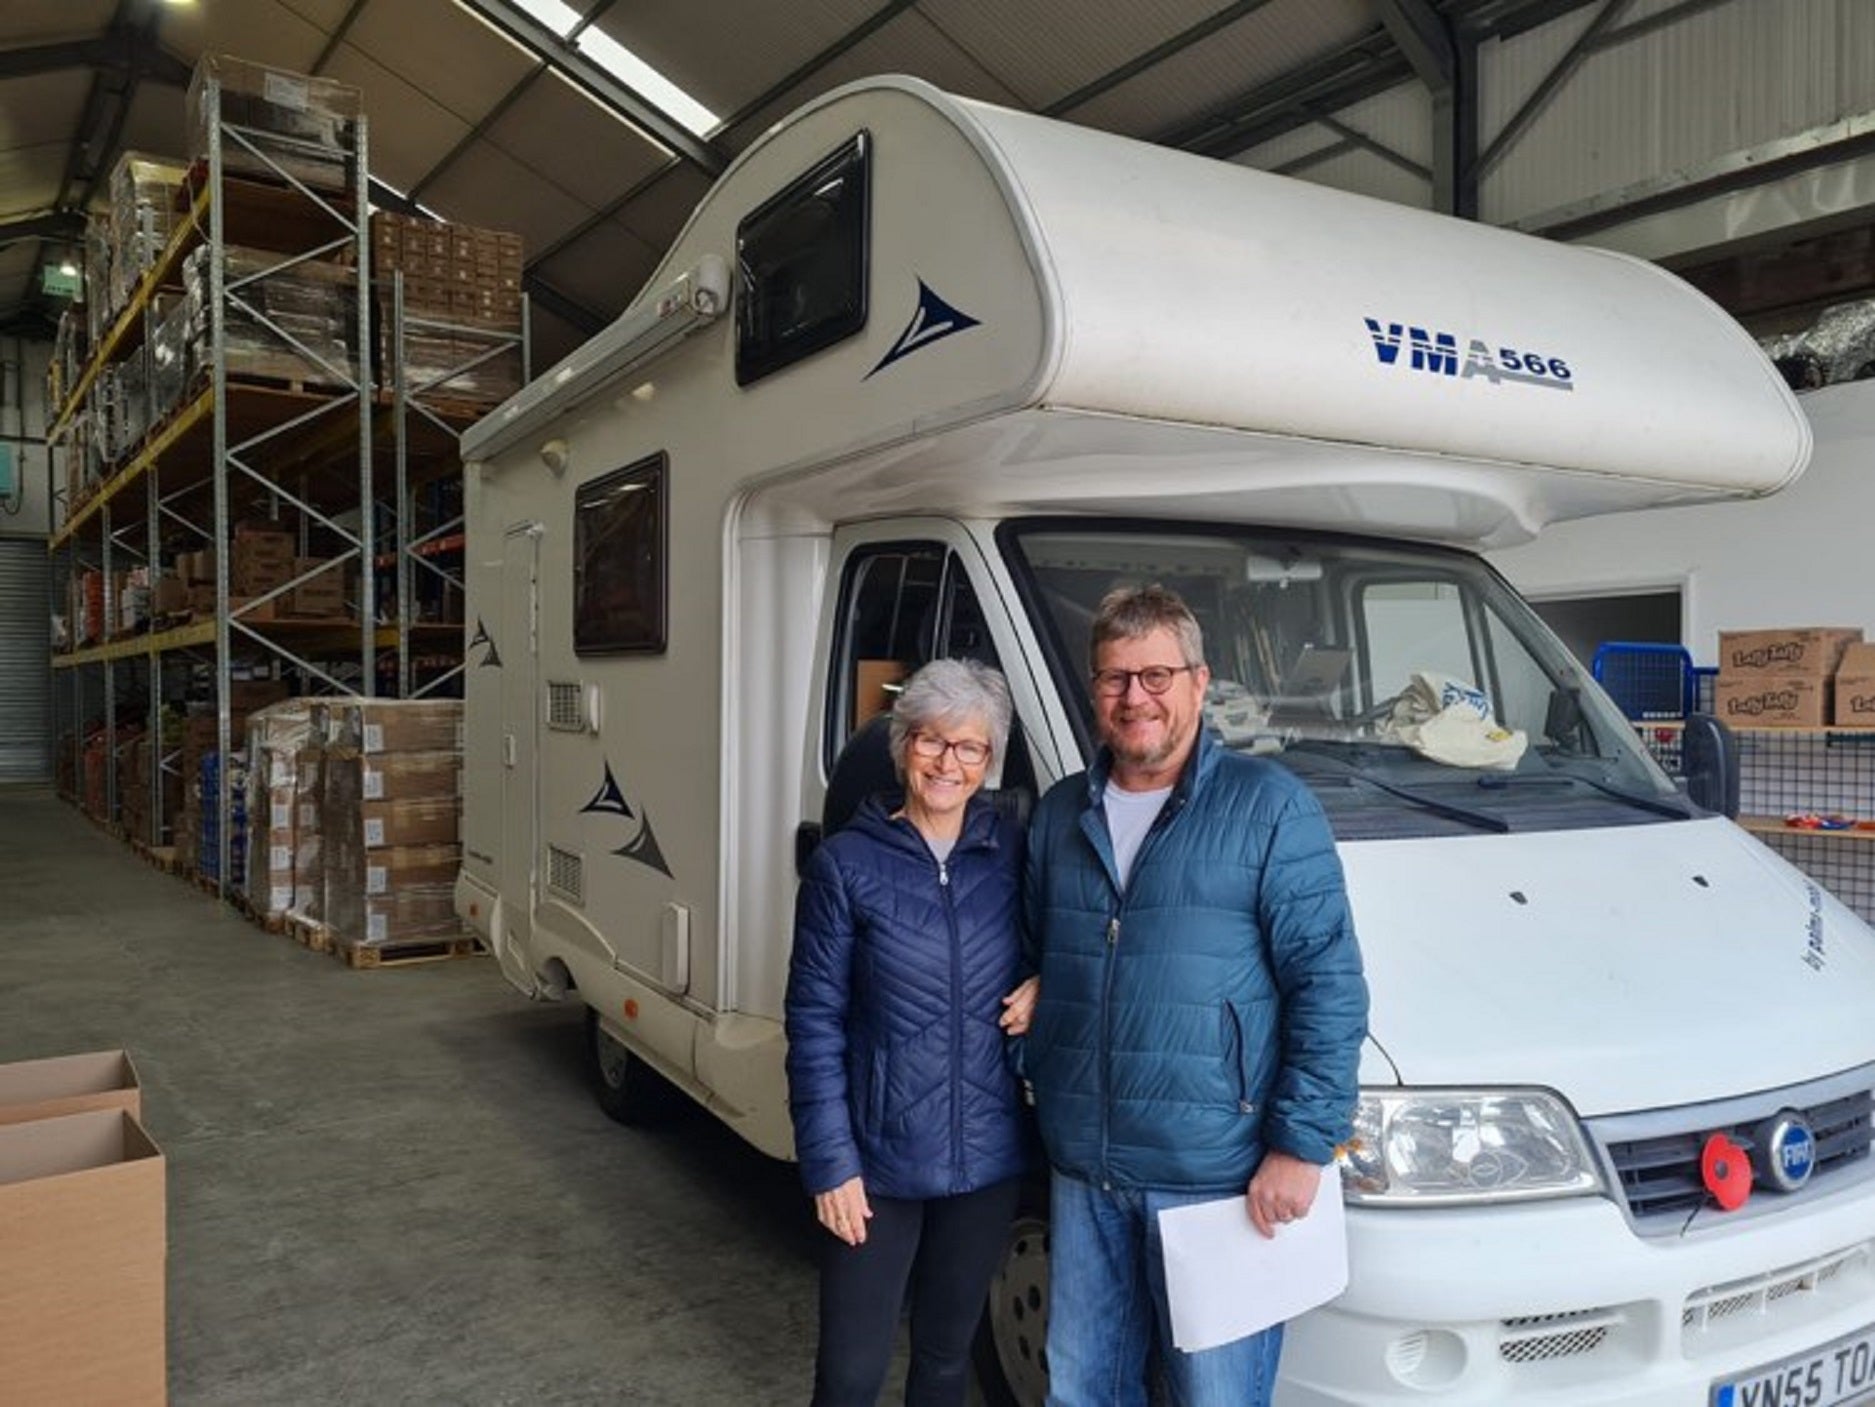 Laura Rice and her husband Ken are travelling from Hampshire to help people fleeing Ukraine (Laura Rice)